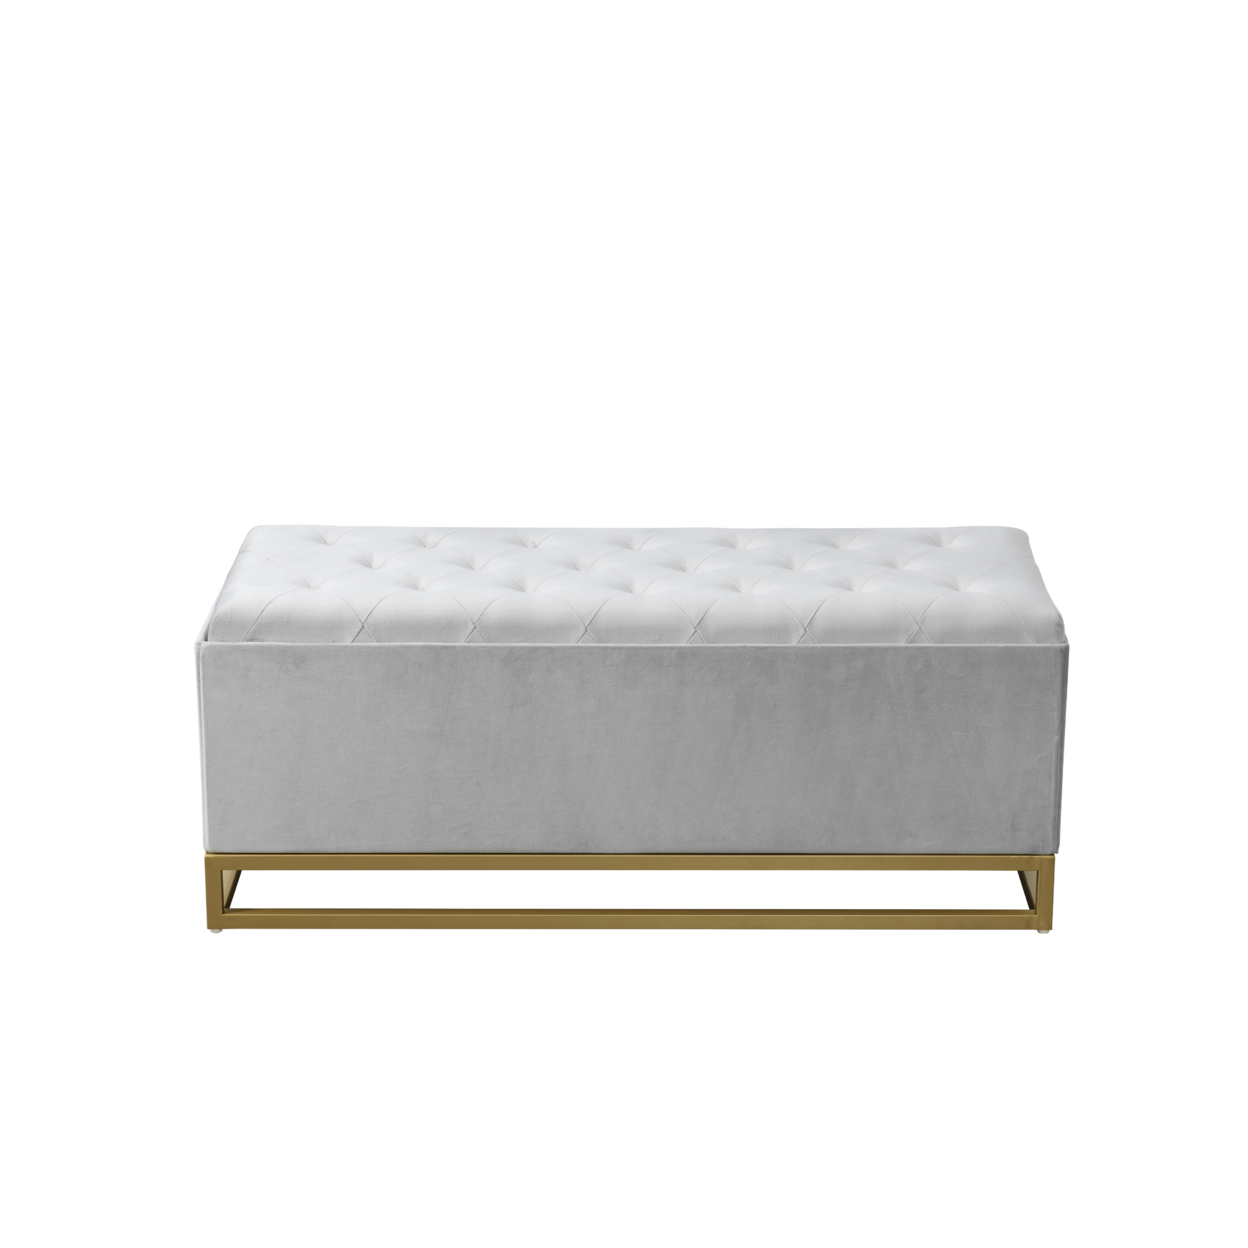 Iconic Home Kaili Storage Bench Velvet Upholstered Tufted Seat Gold Tone Metal Base With Discrete Interior Compartment - Black